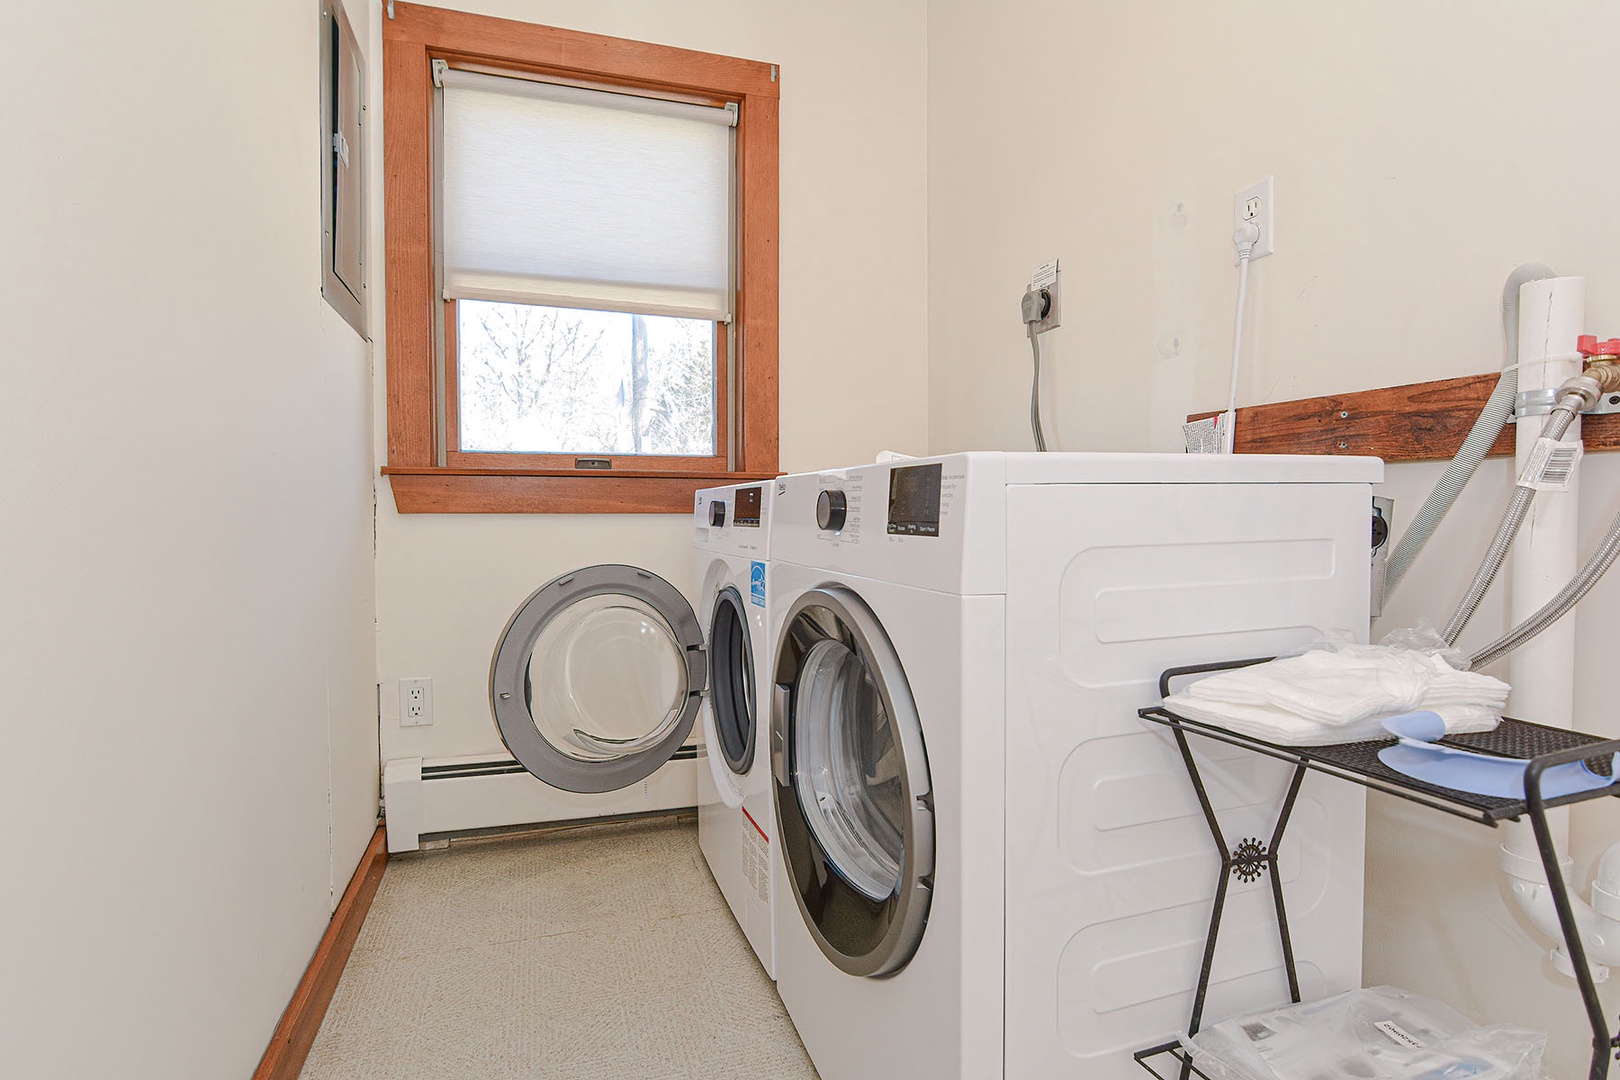 The laundry is located in the downstairs half bath.